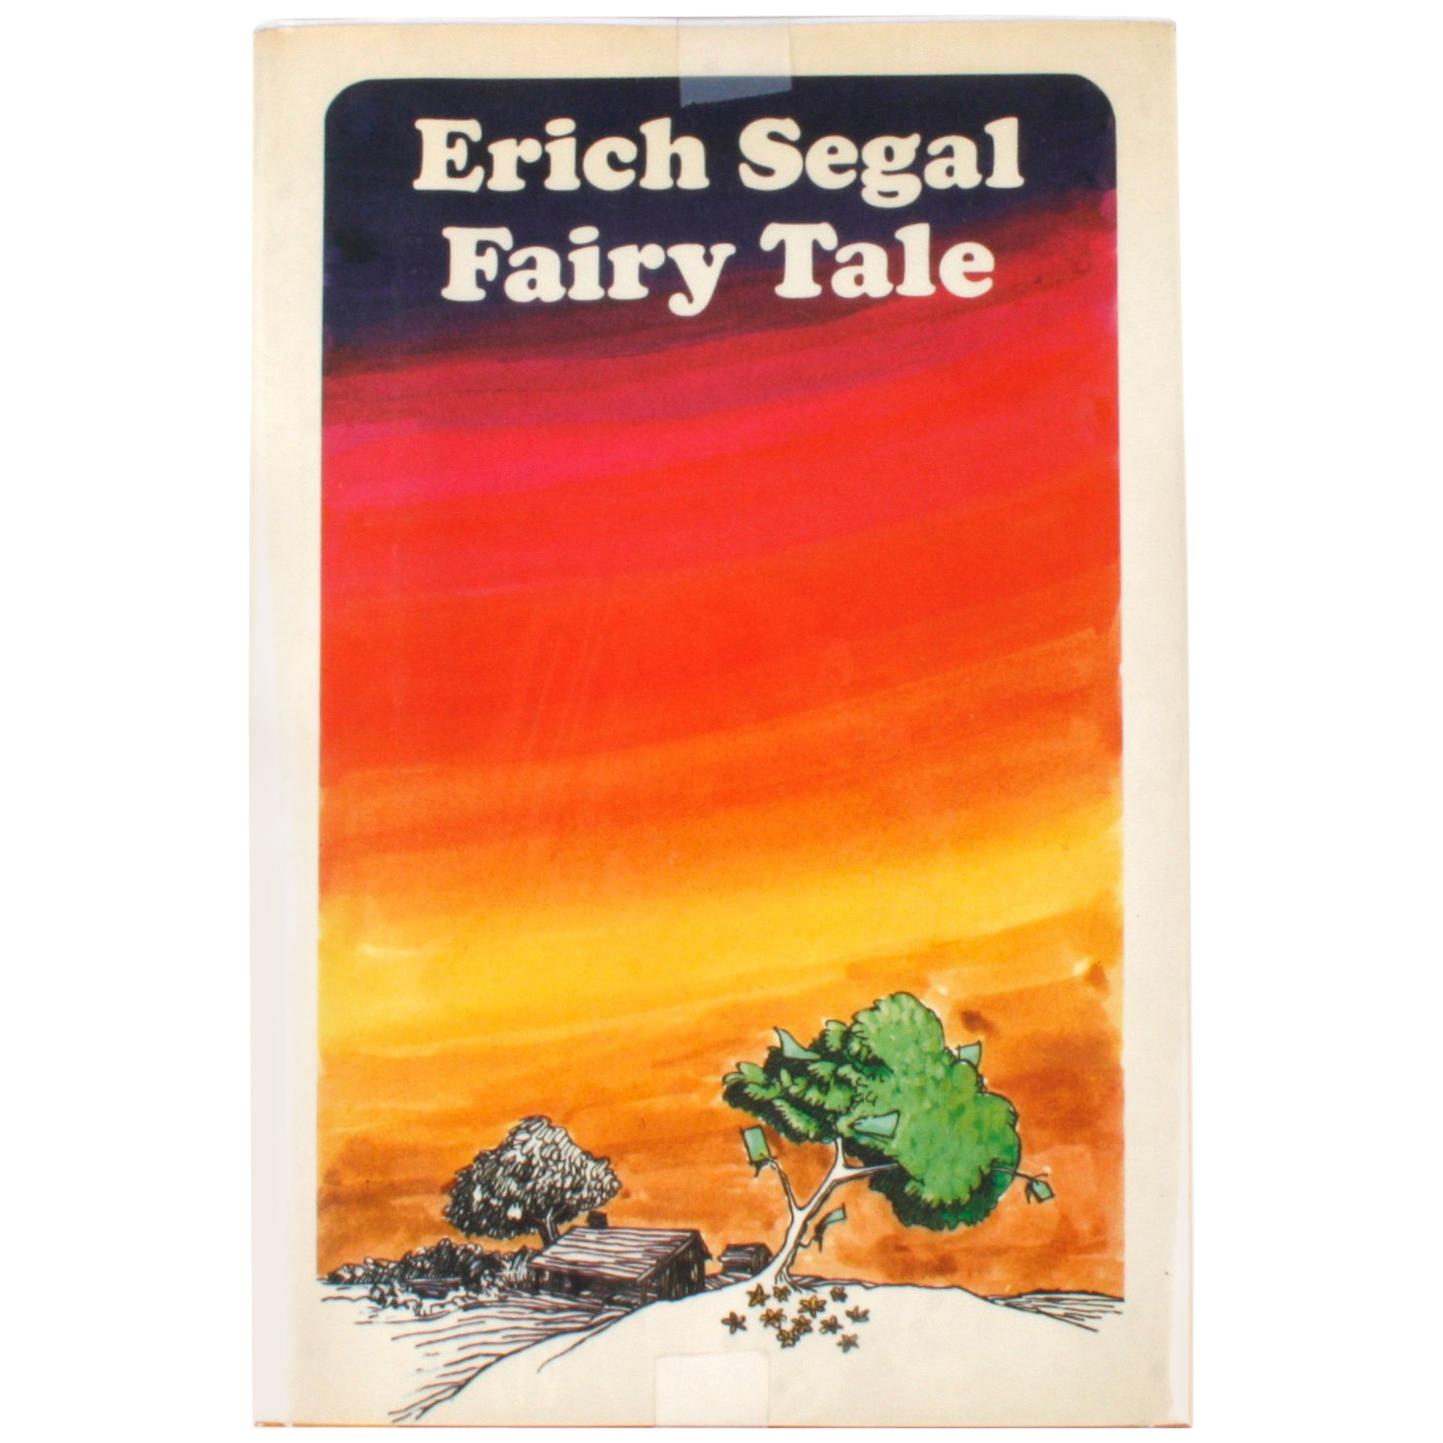 "Fairy Tale" by Erich Segal, Signed First Edition